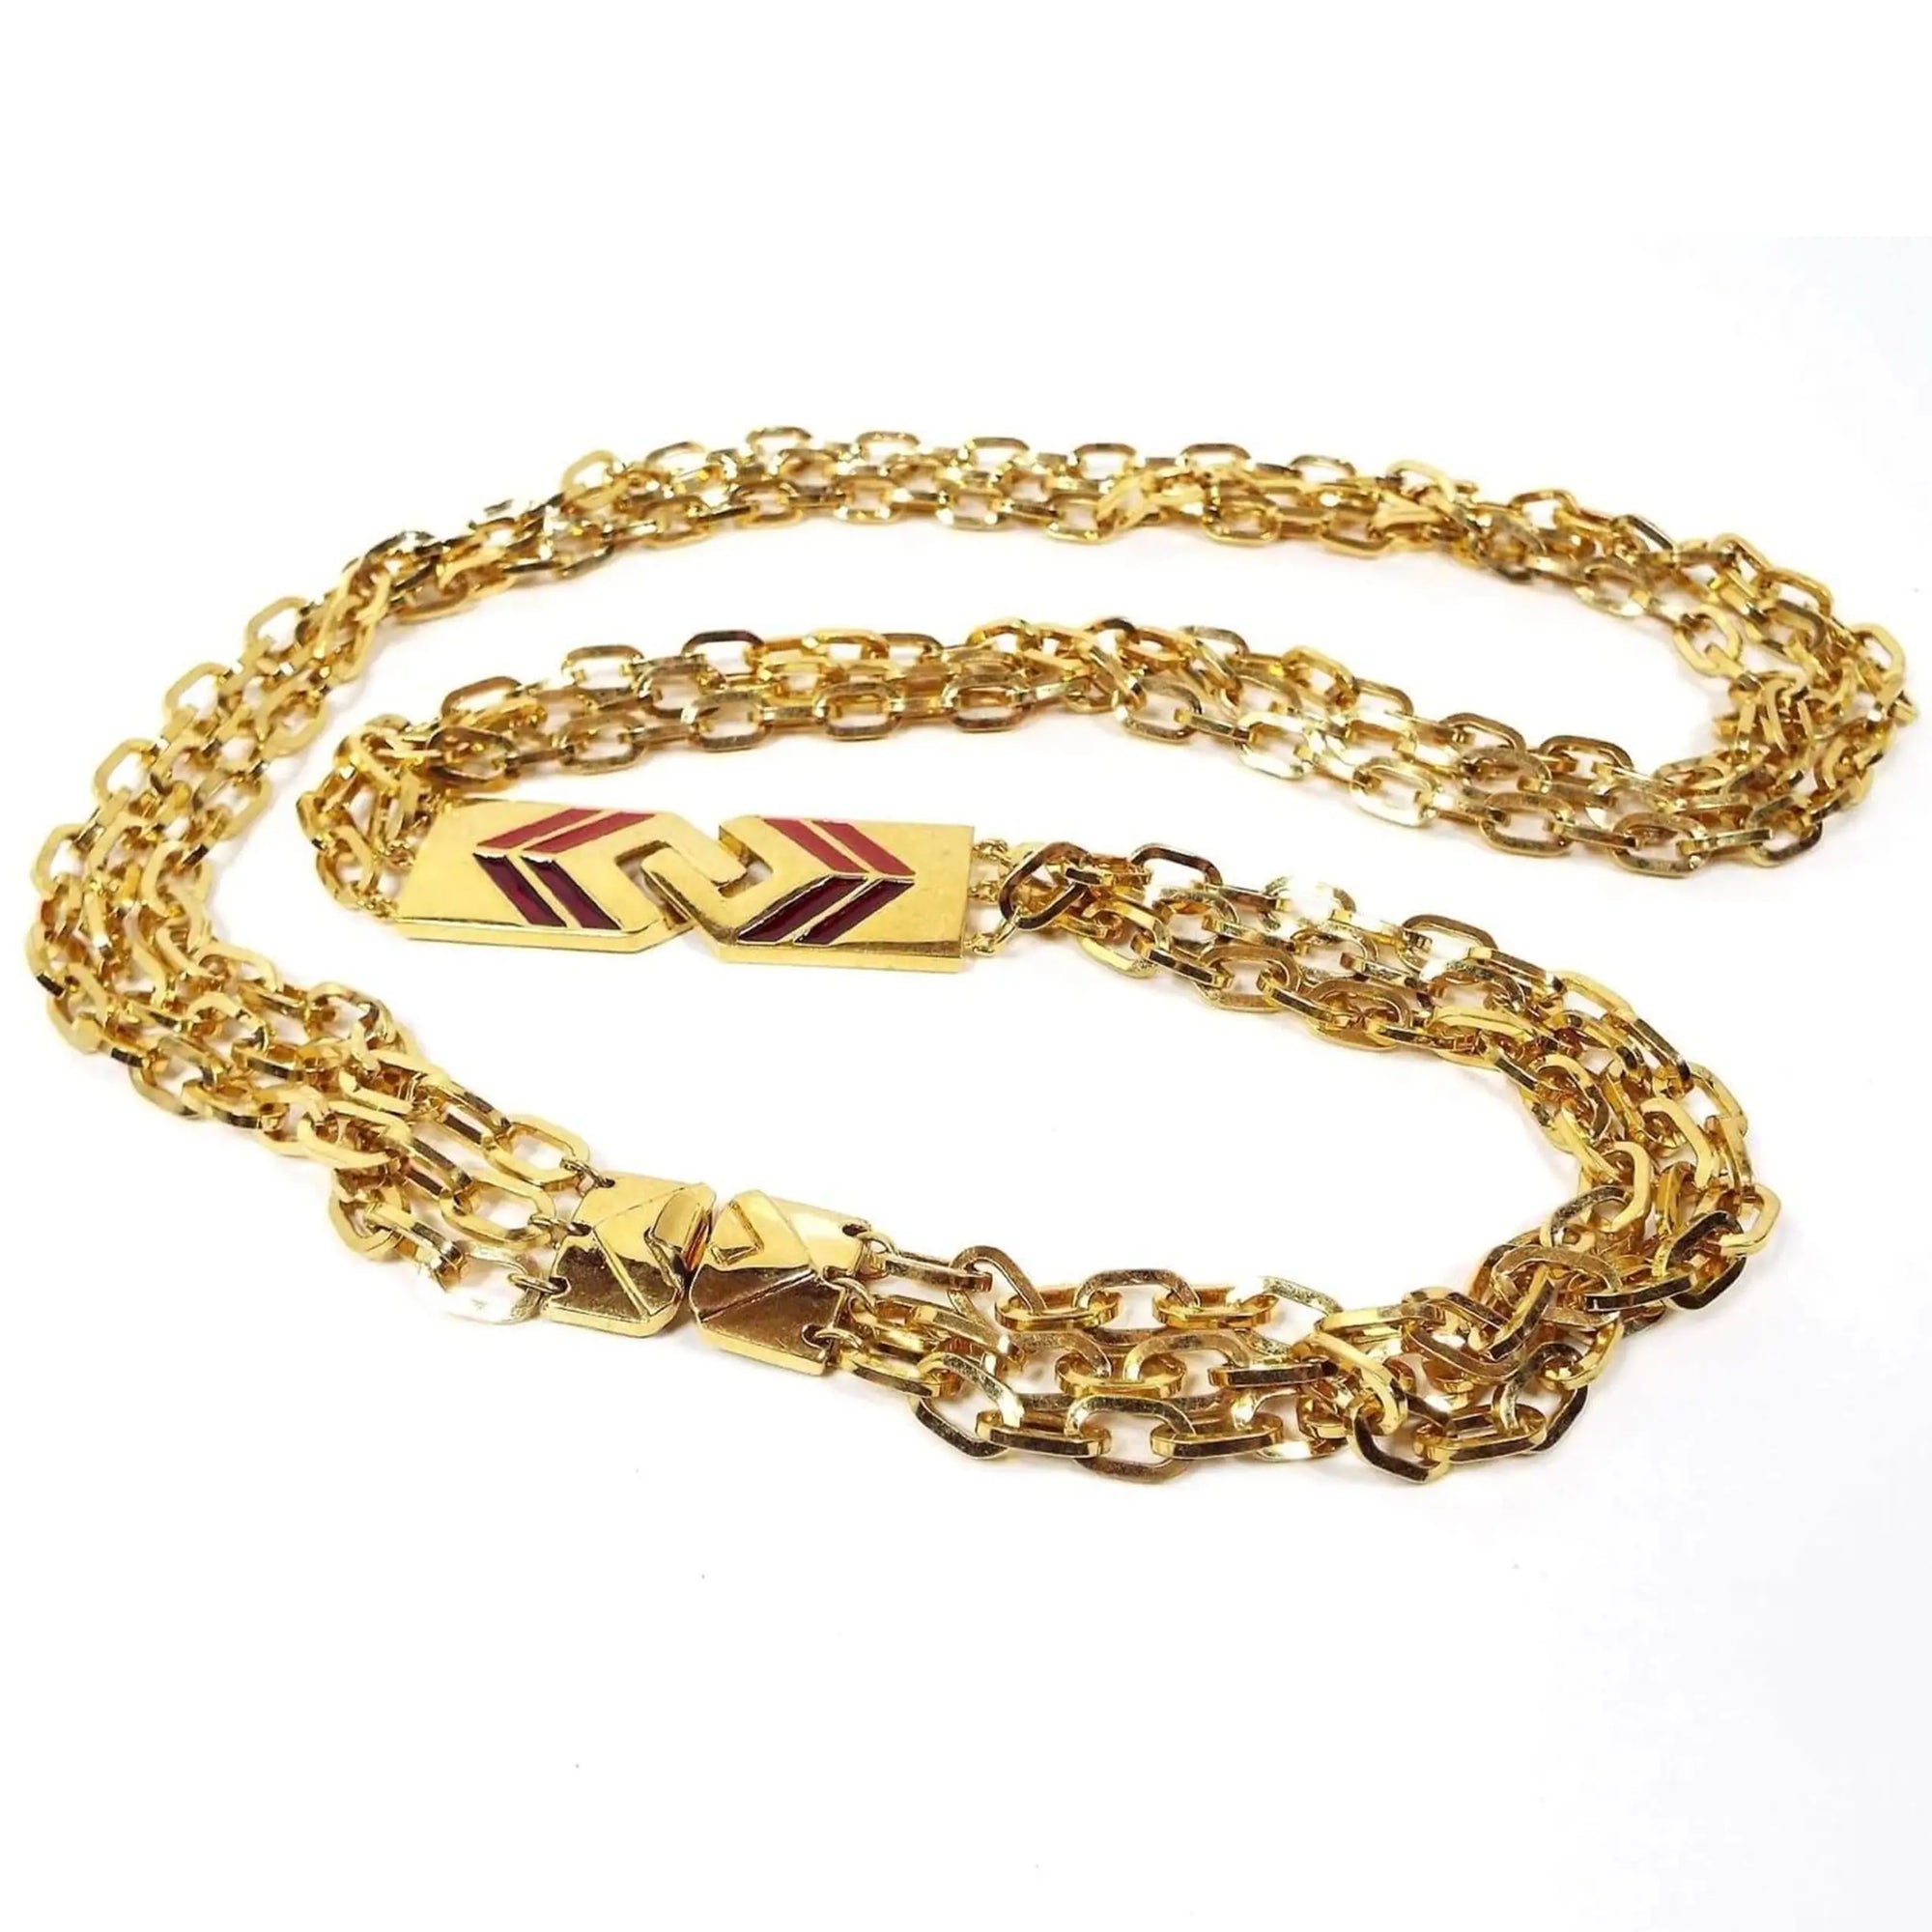 Top view of the retro vintage Monet chain necklace. The plated metal is gold tone in color. The necklace is long with 3 strands of oval cable link chain. There is a larger box clasp at the end of the necklace. Part way down the necklace are two large interlocking links that form a long rectangle. Each link has a chevron double V style design. One side of the chevron has red enamel and the other has dark red enamel.